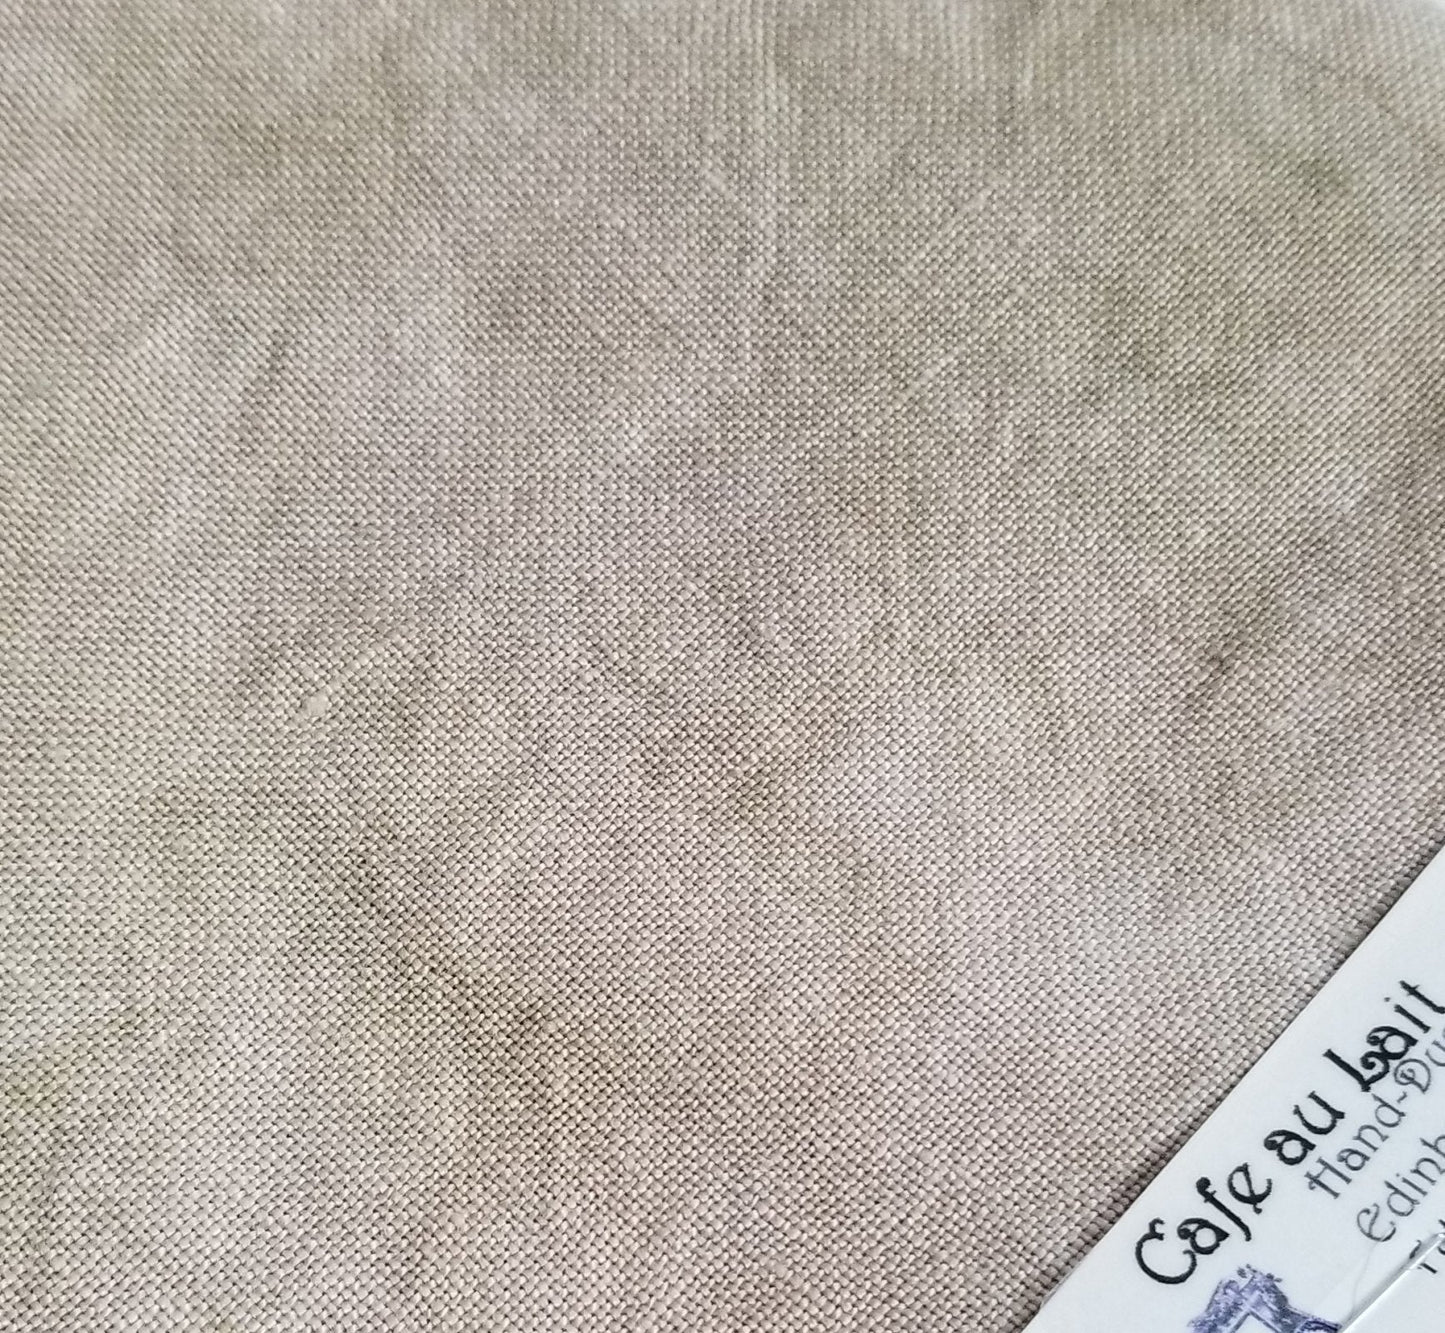 28 Count Linen - Cafe au Lait - Fiber on a Whim, Fabric, The Crafty Grimalkin - A Cross Stitch Store